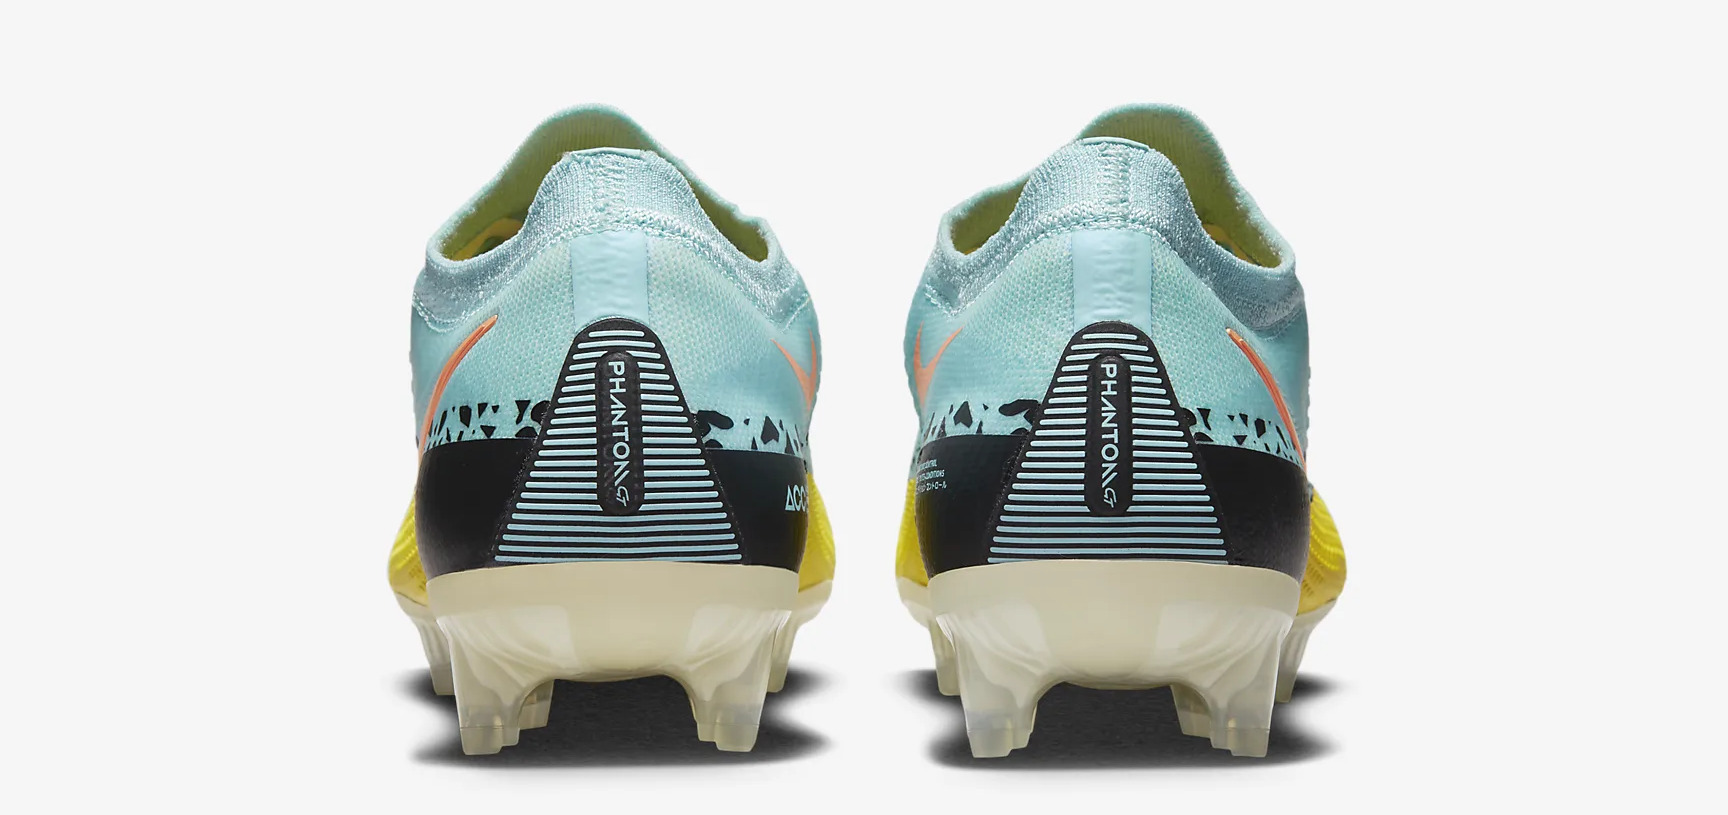 Would you cop or drop these World Cup Nike phantom GT2 boots #fifa23 #